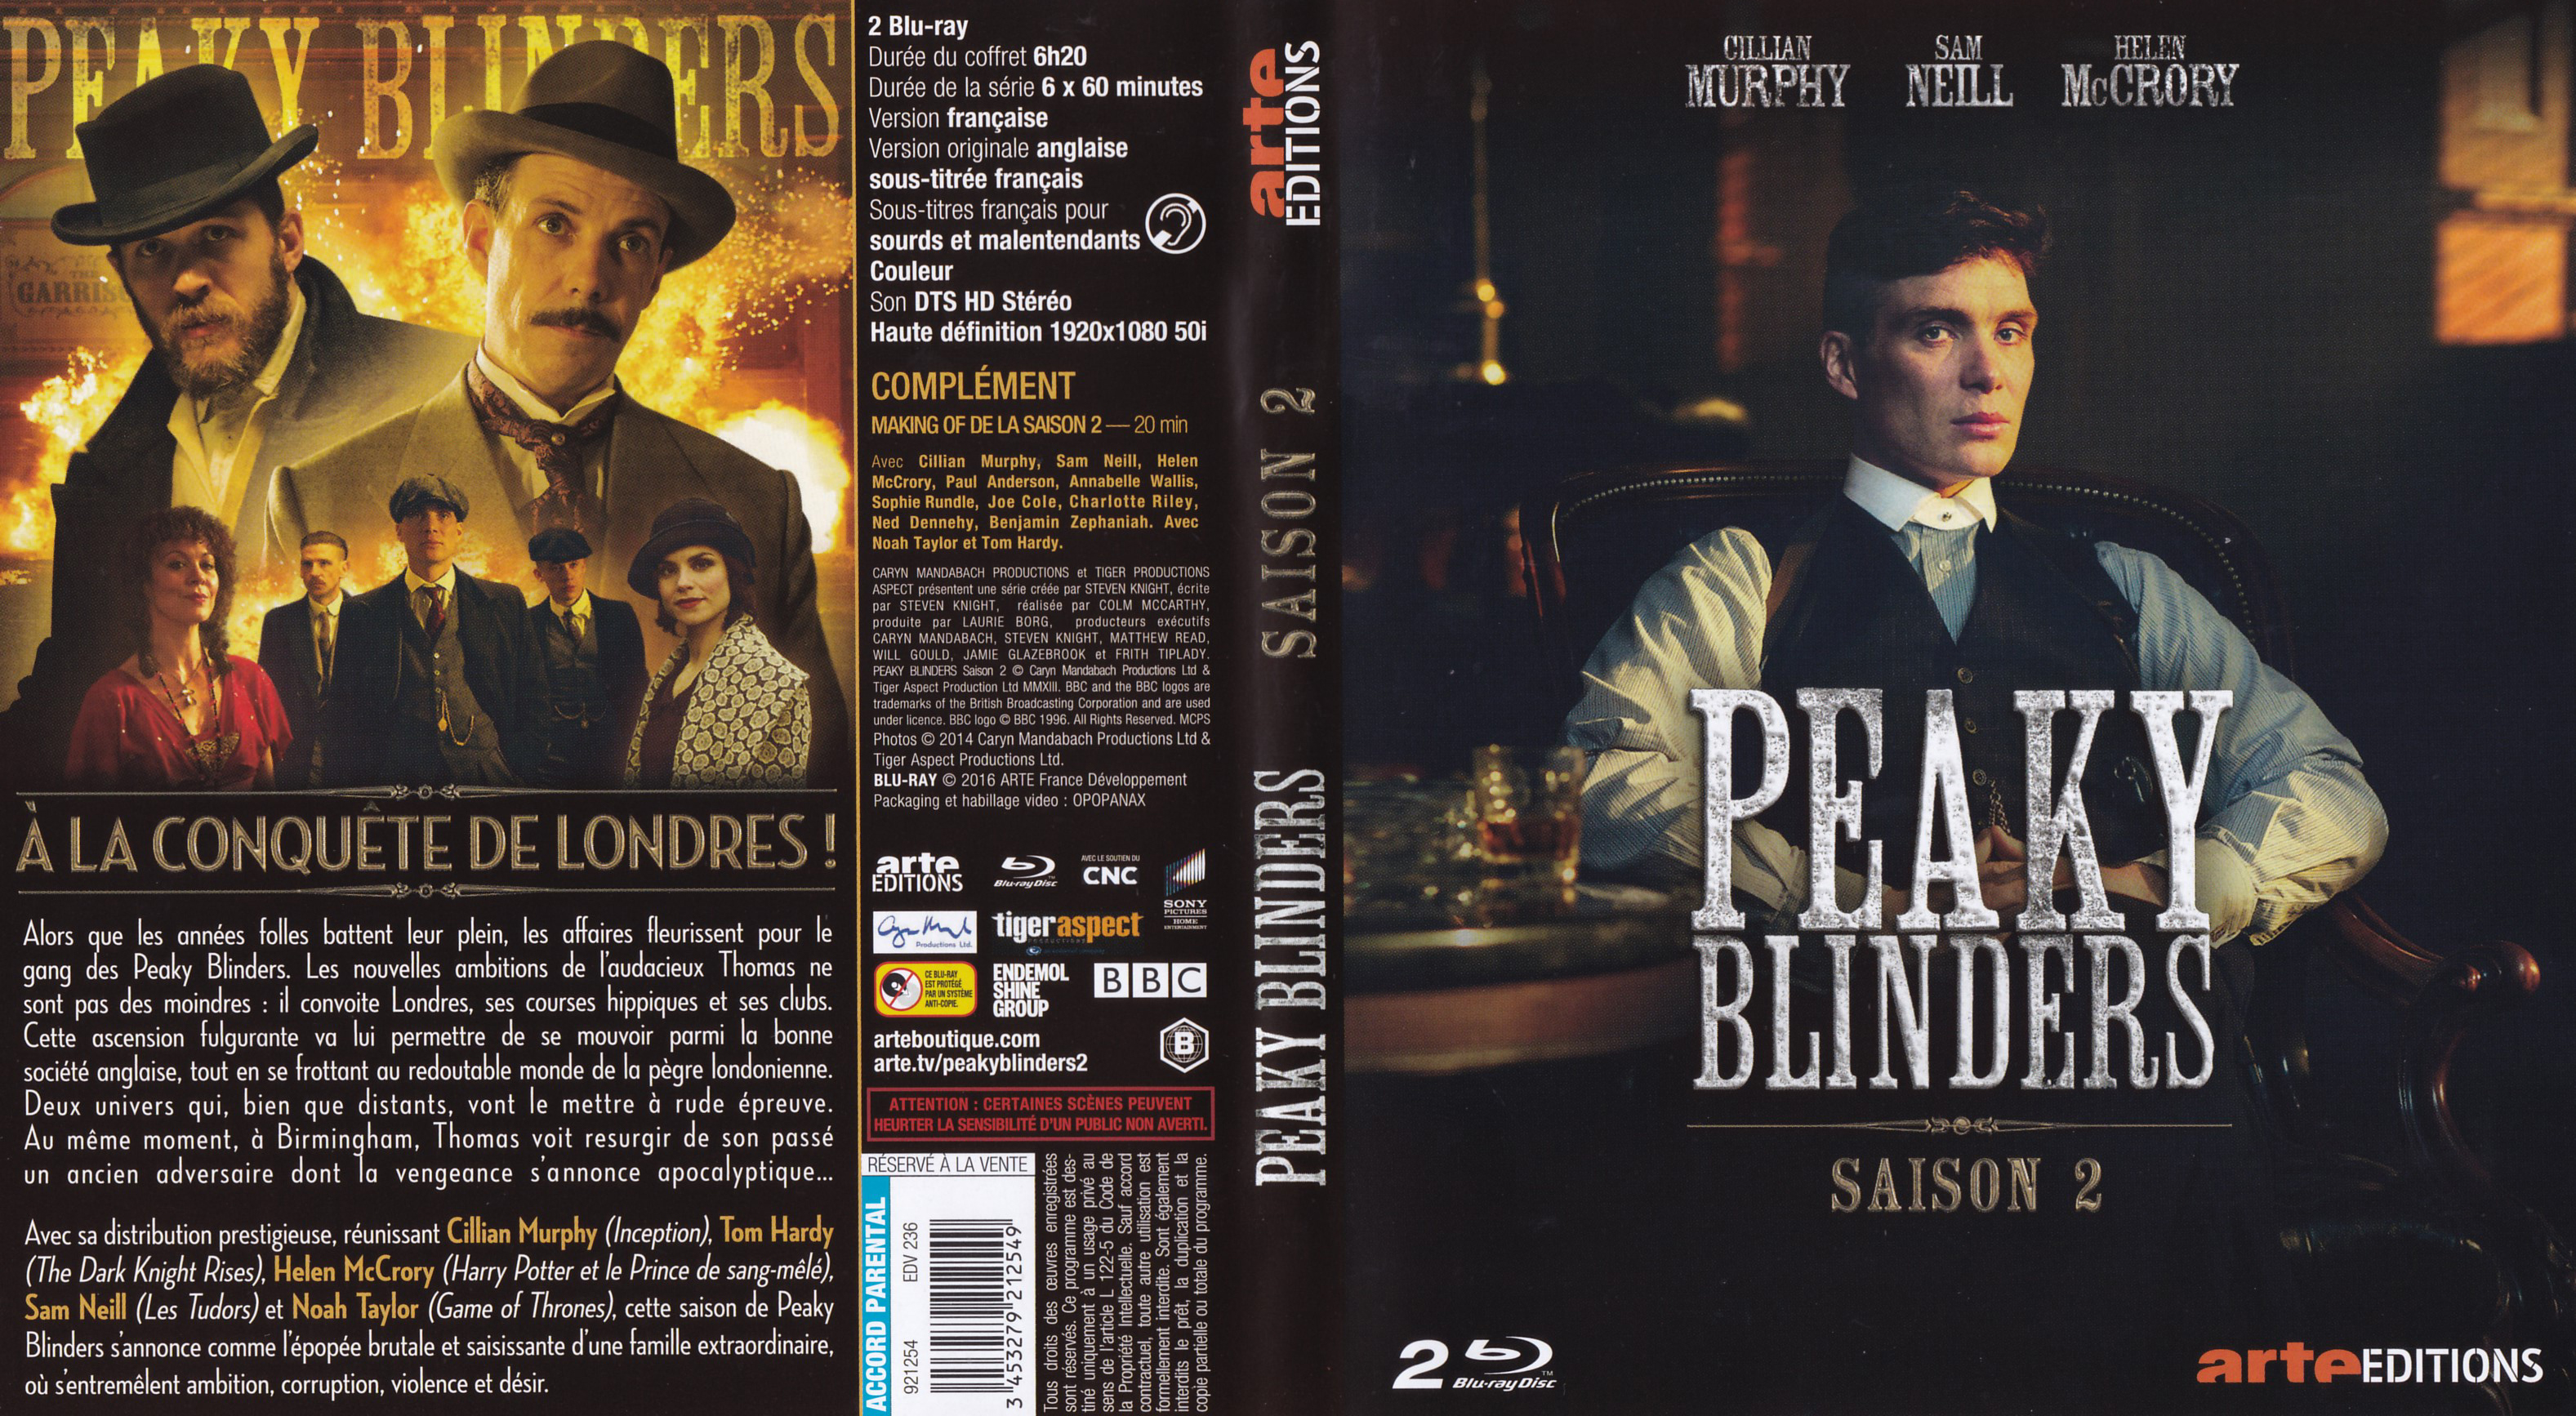 Jaquette DVD Peaky blinders Saison 2 (BLU-RAY)